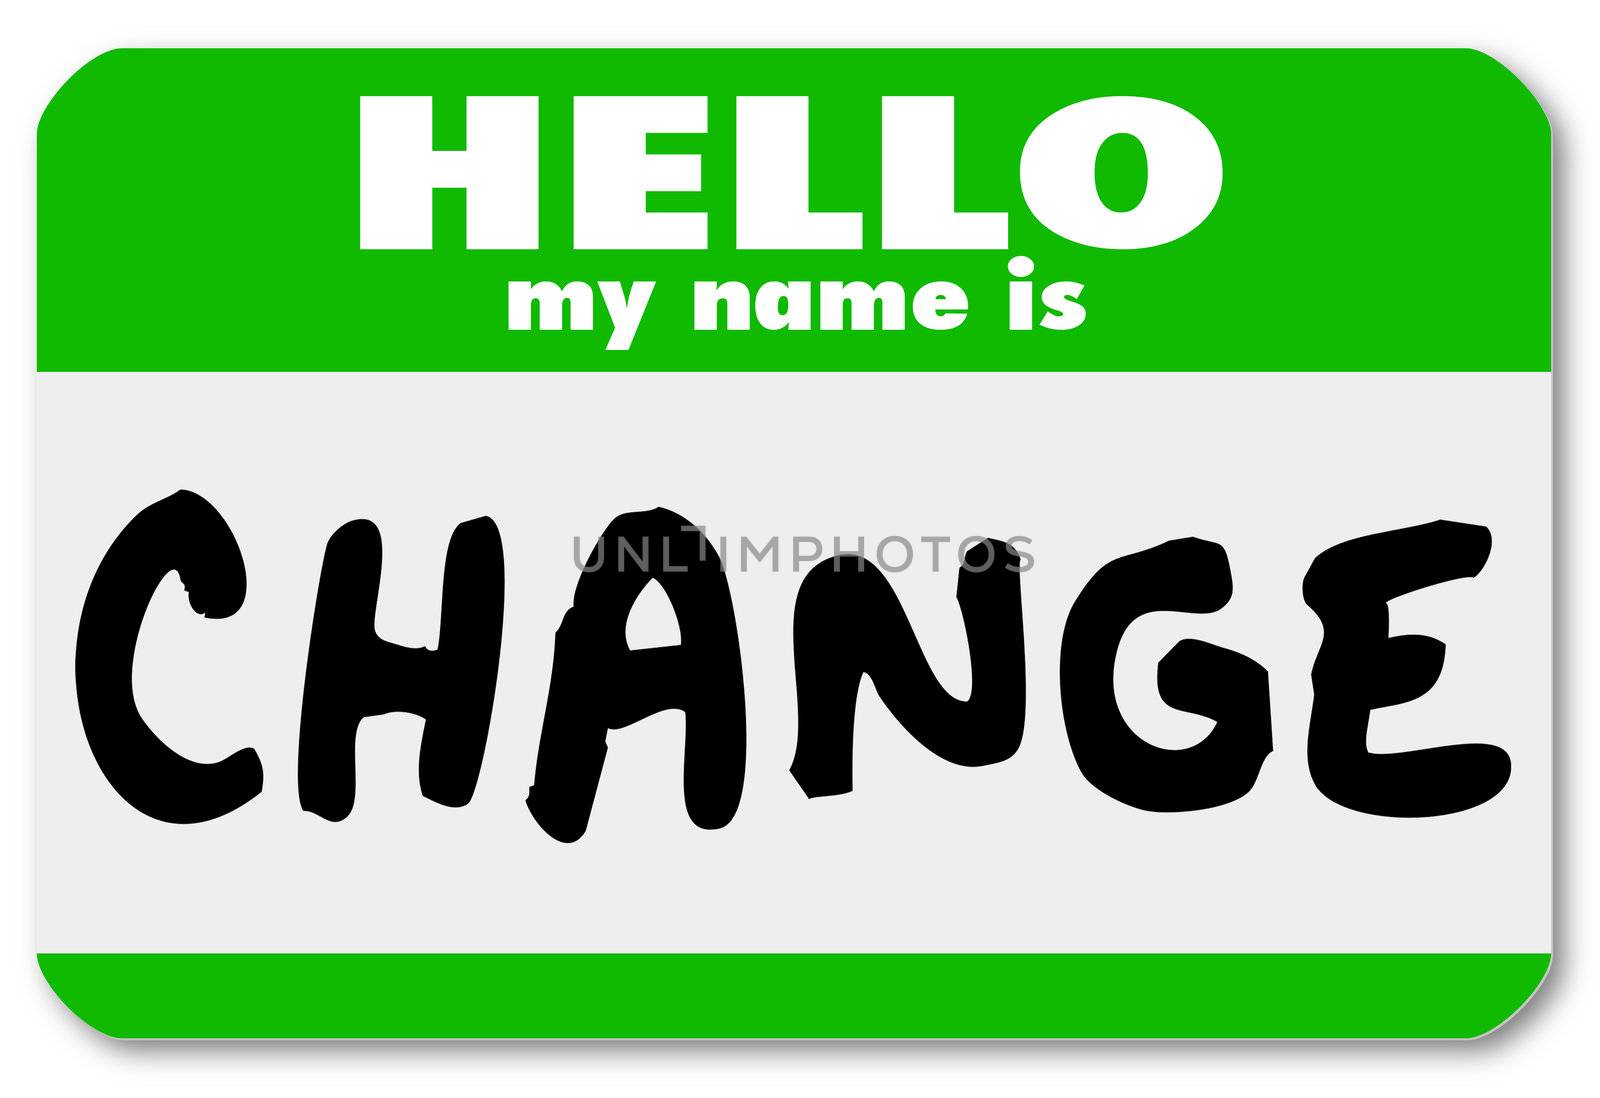 The words Hello My Name is Change on a green namtag sticker, symbolizing an opportunity for changing and adapting to new challenges and need to react to grow and succeed